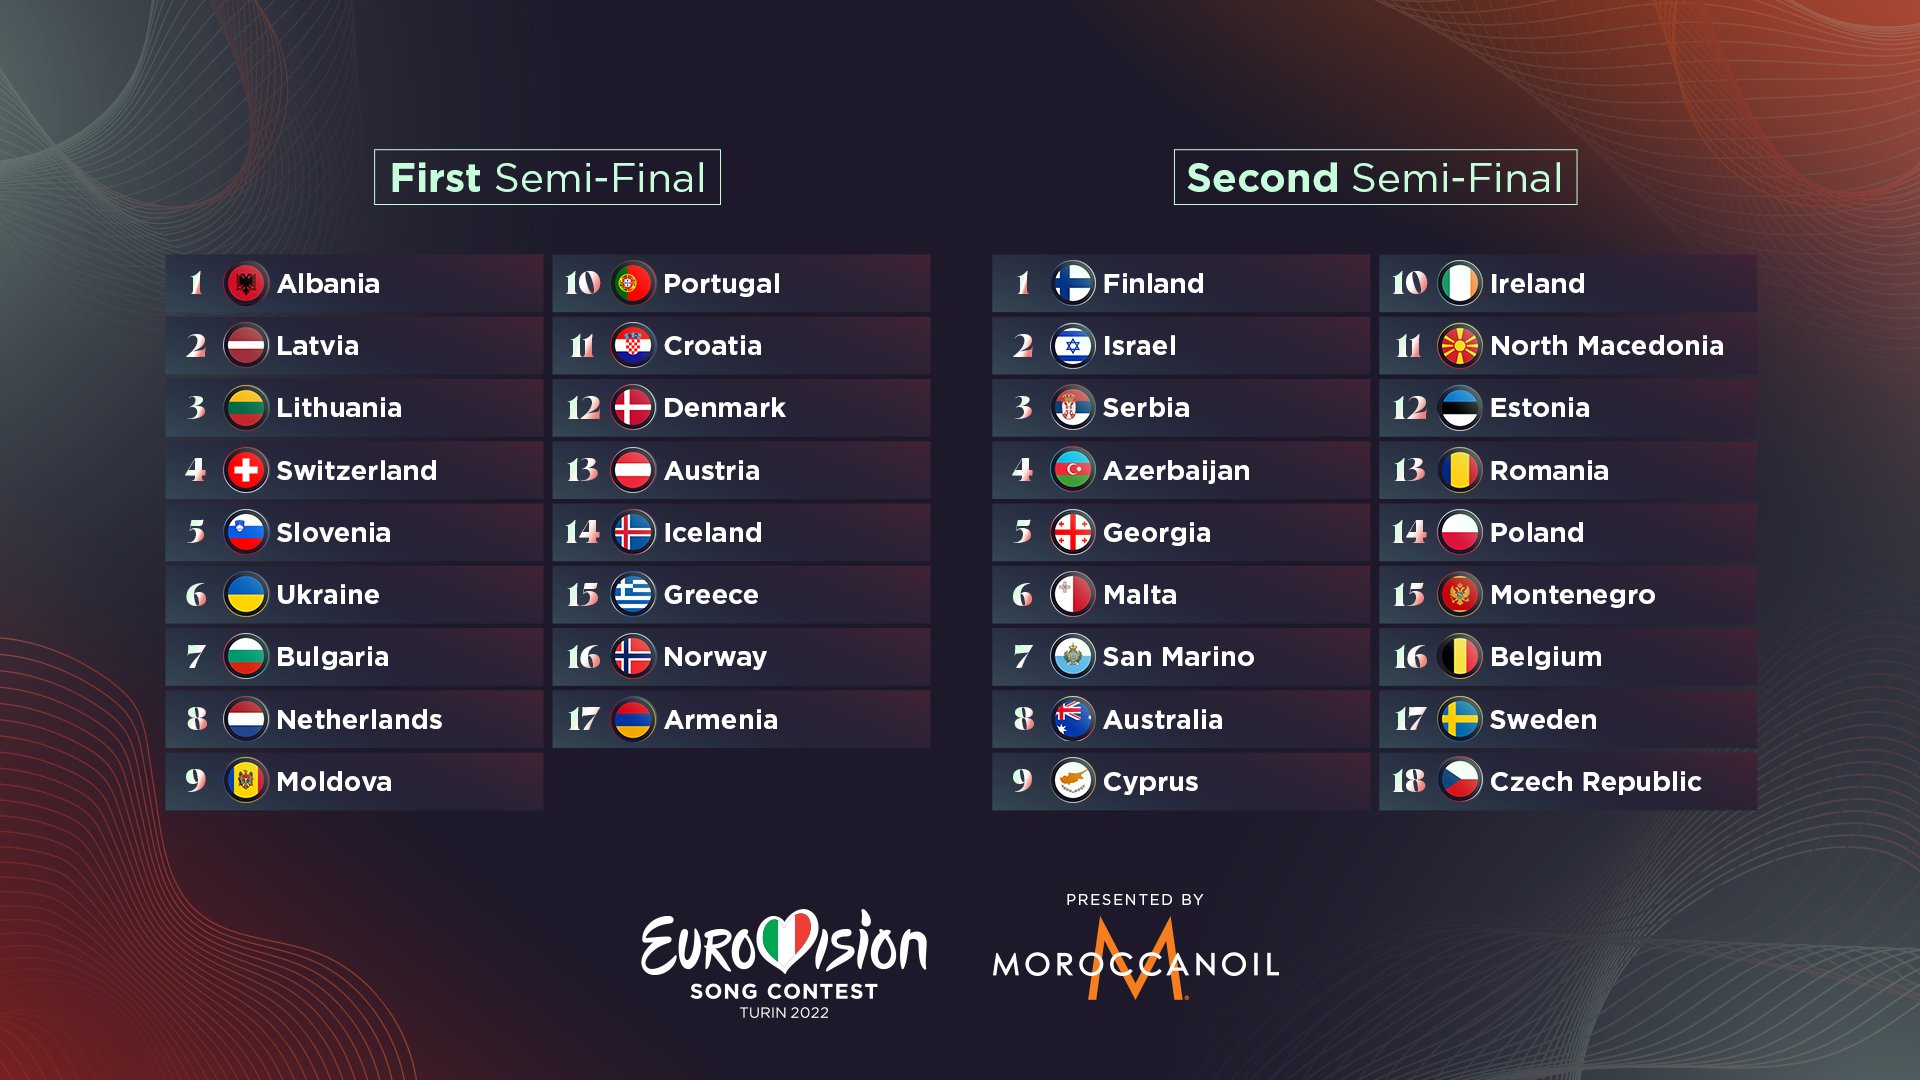 Eurovision Song Contest on Twitter "The Running Order for the